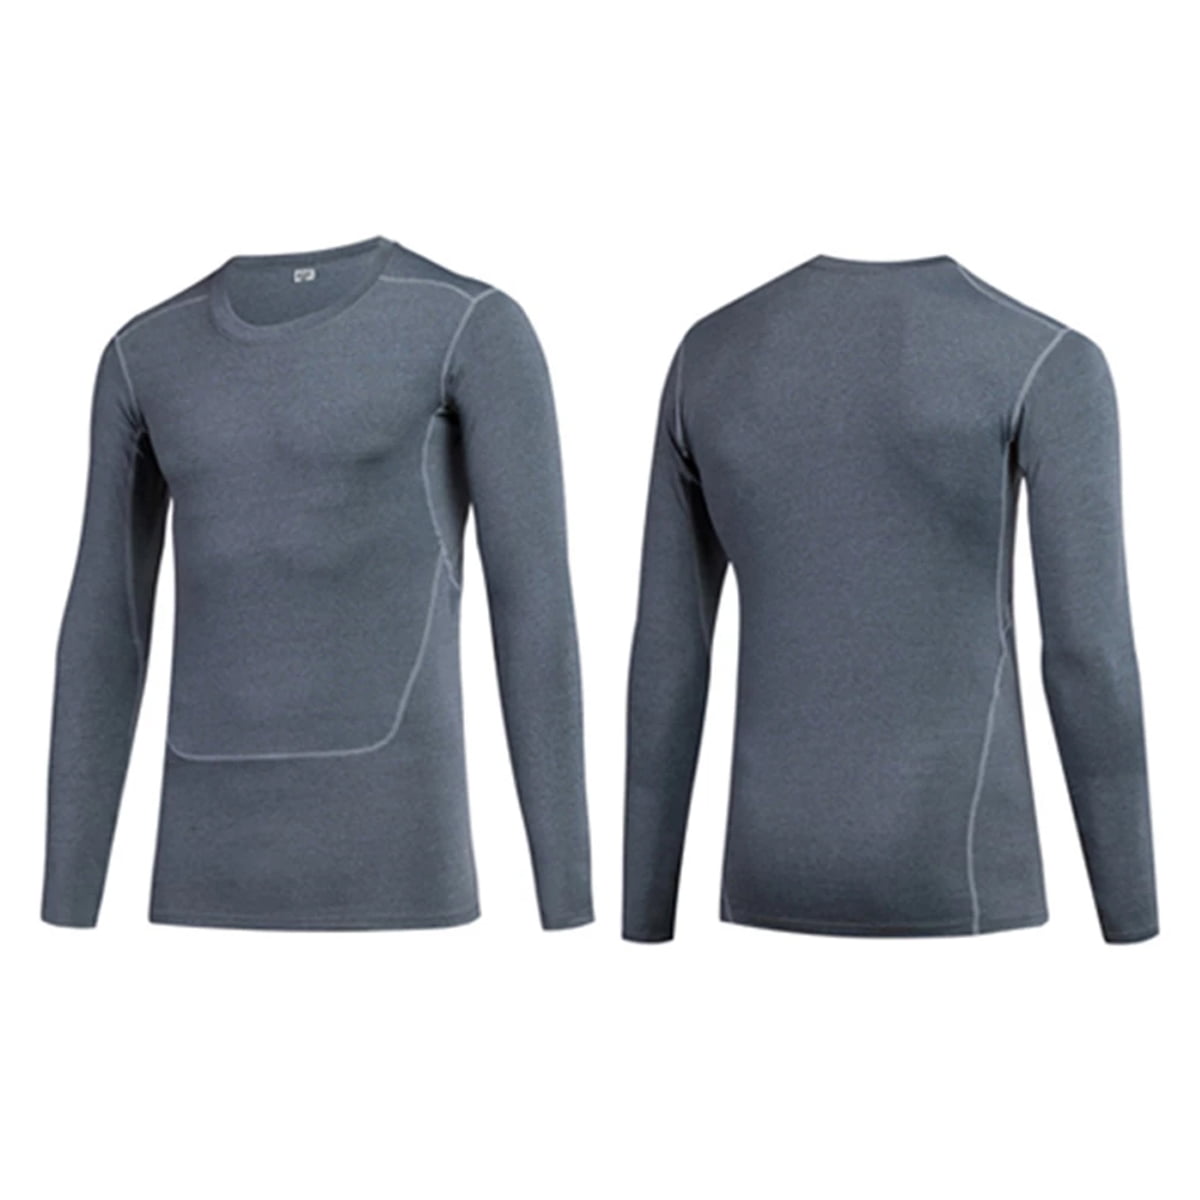 Mens Dry Fit Long Sleeve Compression Shirt